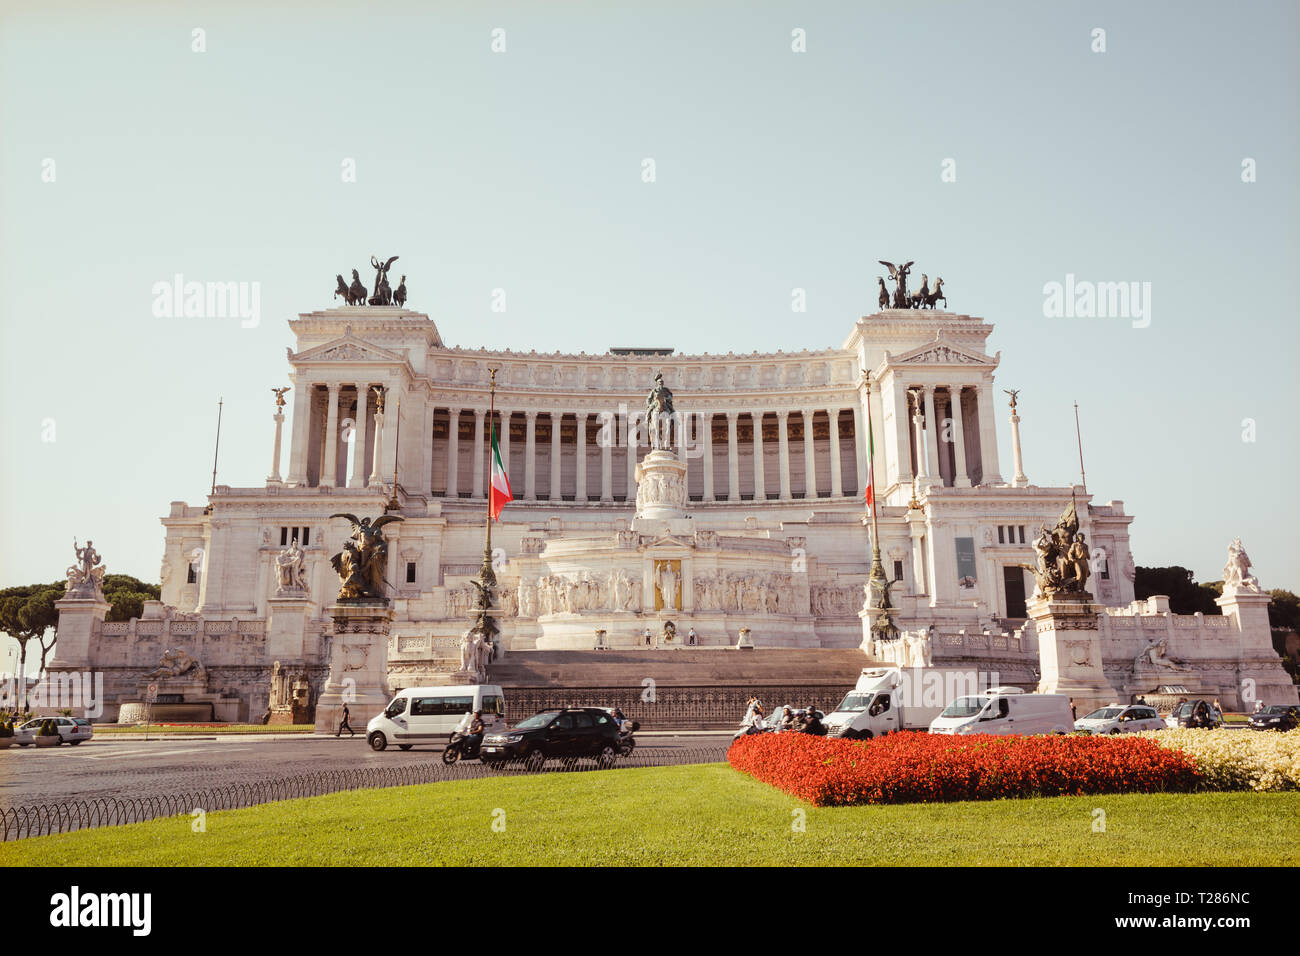 Rome, Italy - June 20, 2018: Panoramic front view of museum the Vittorio Emanuele II Monument also known as the Vittoriano or Altare della Patria at P Stock Photo